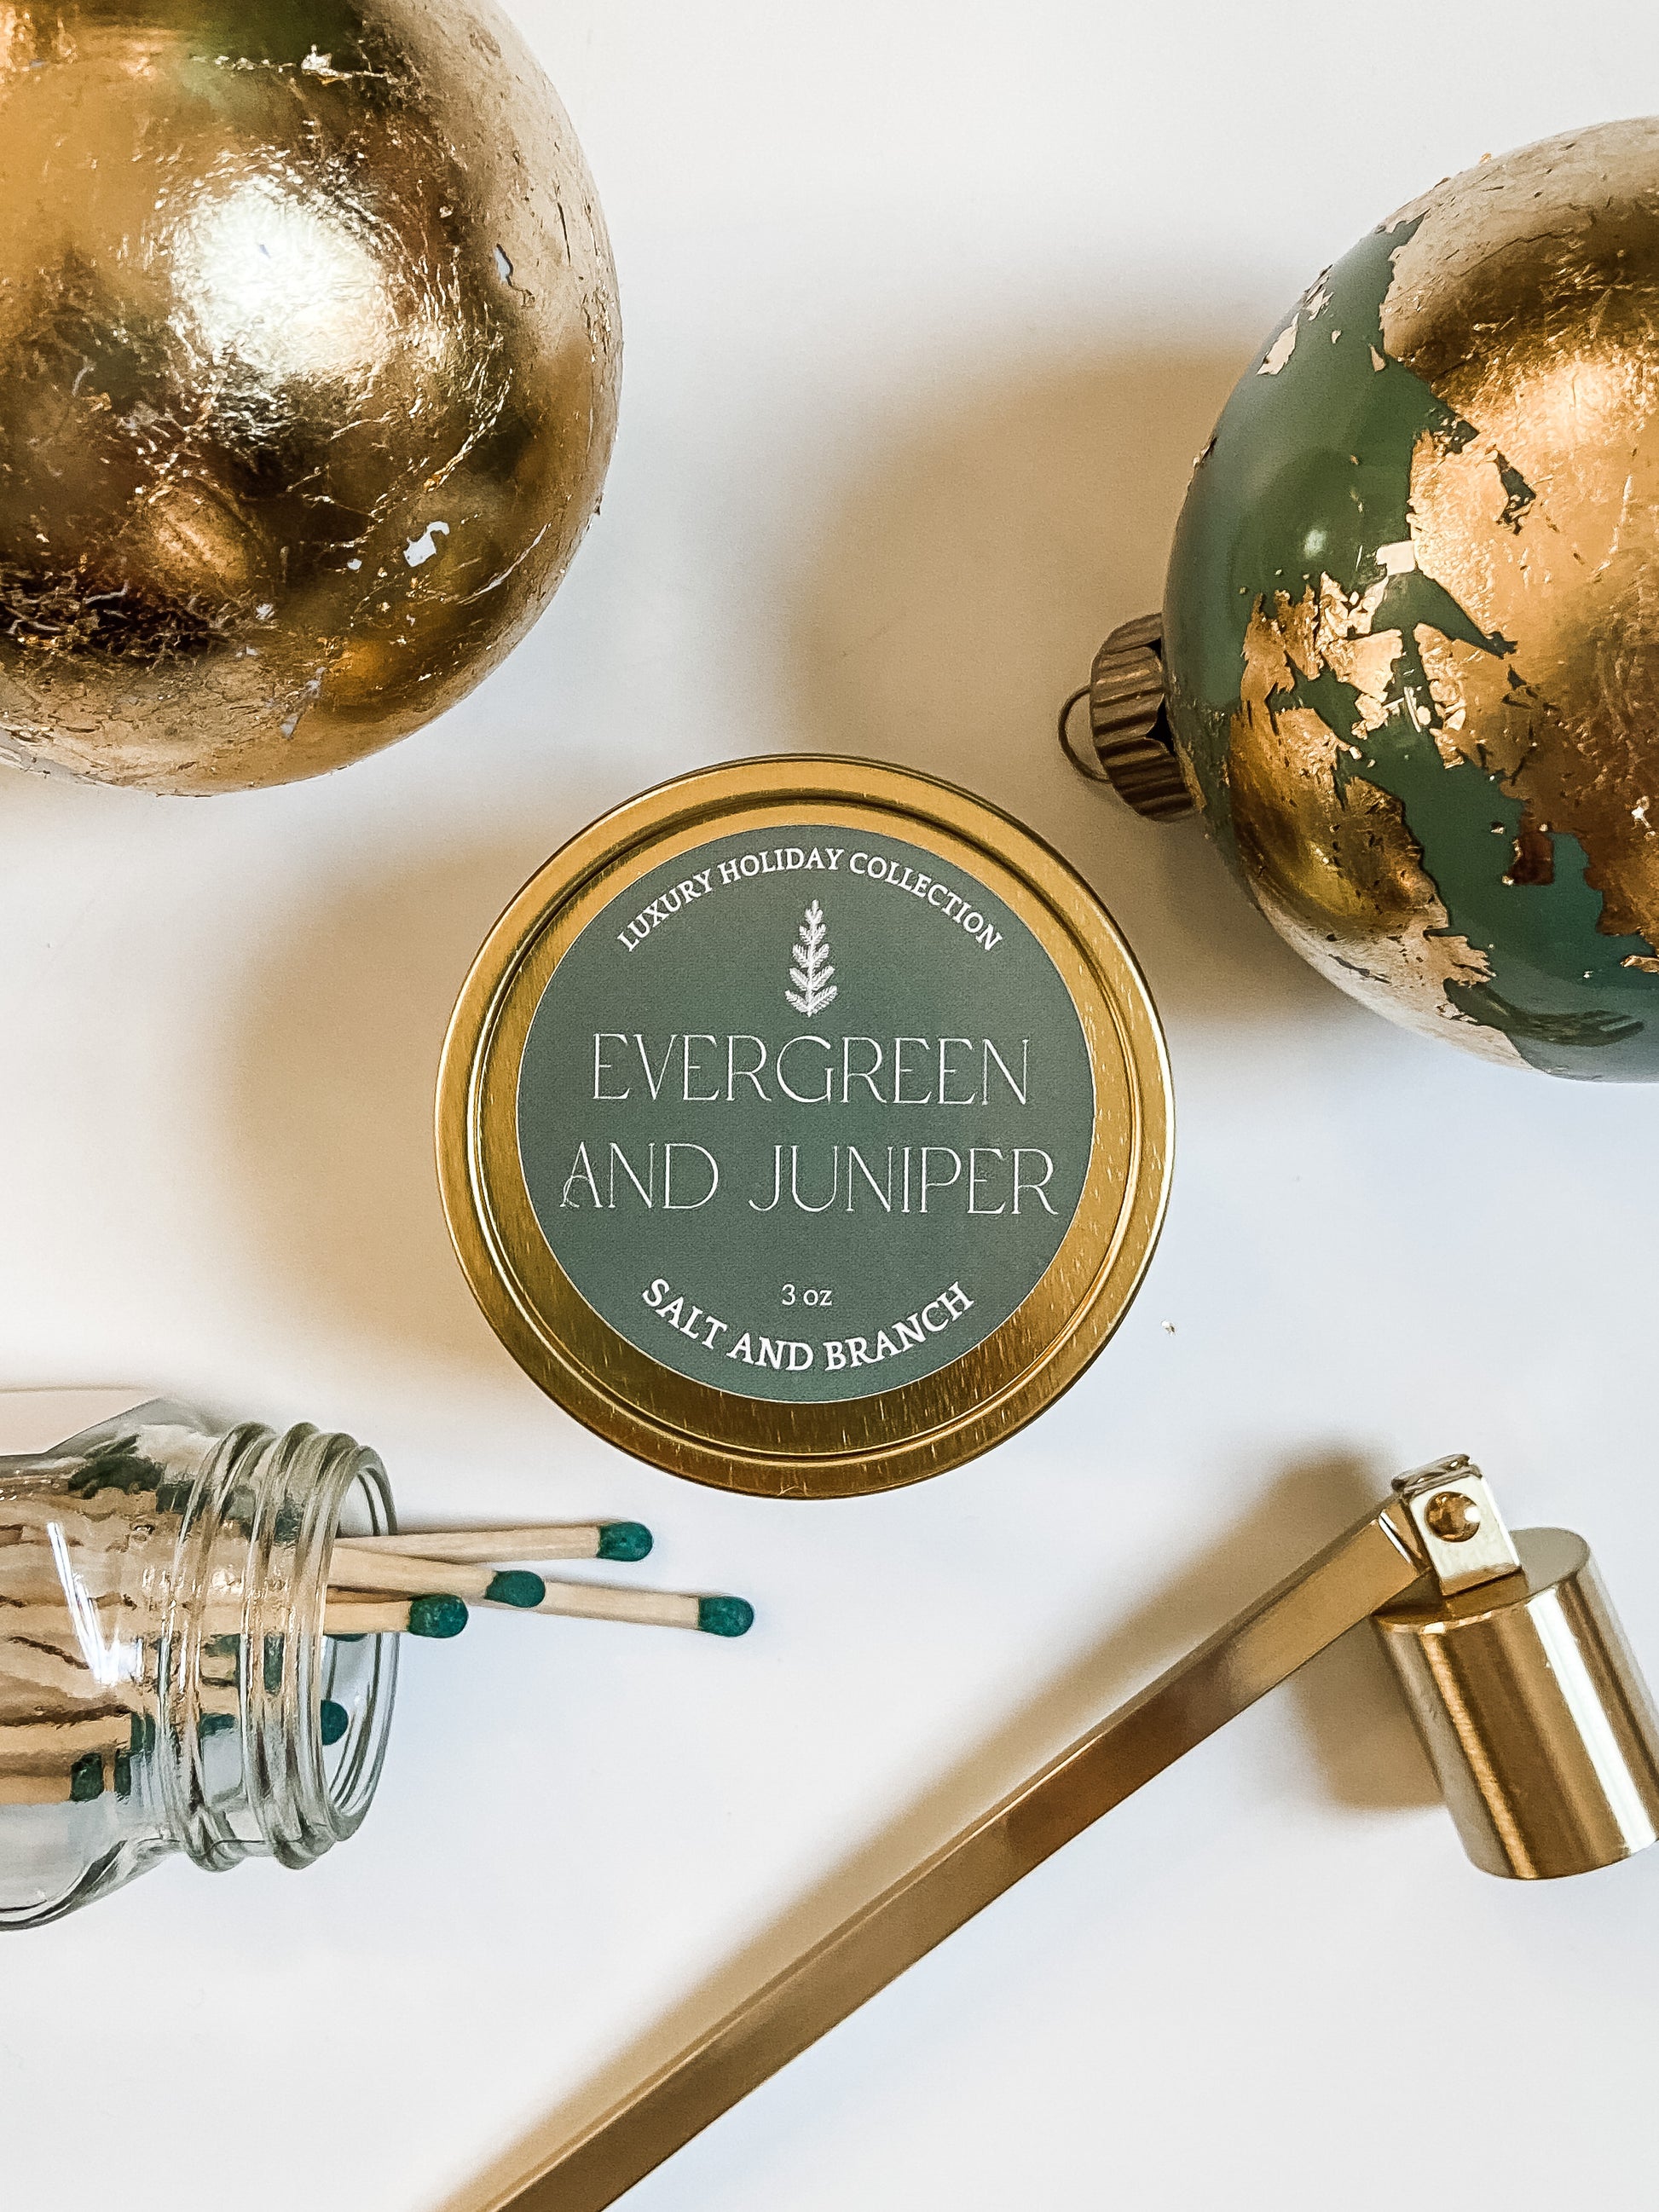 Holiday Gold Travel Tins - Salt and Branch